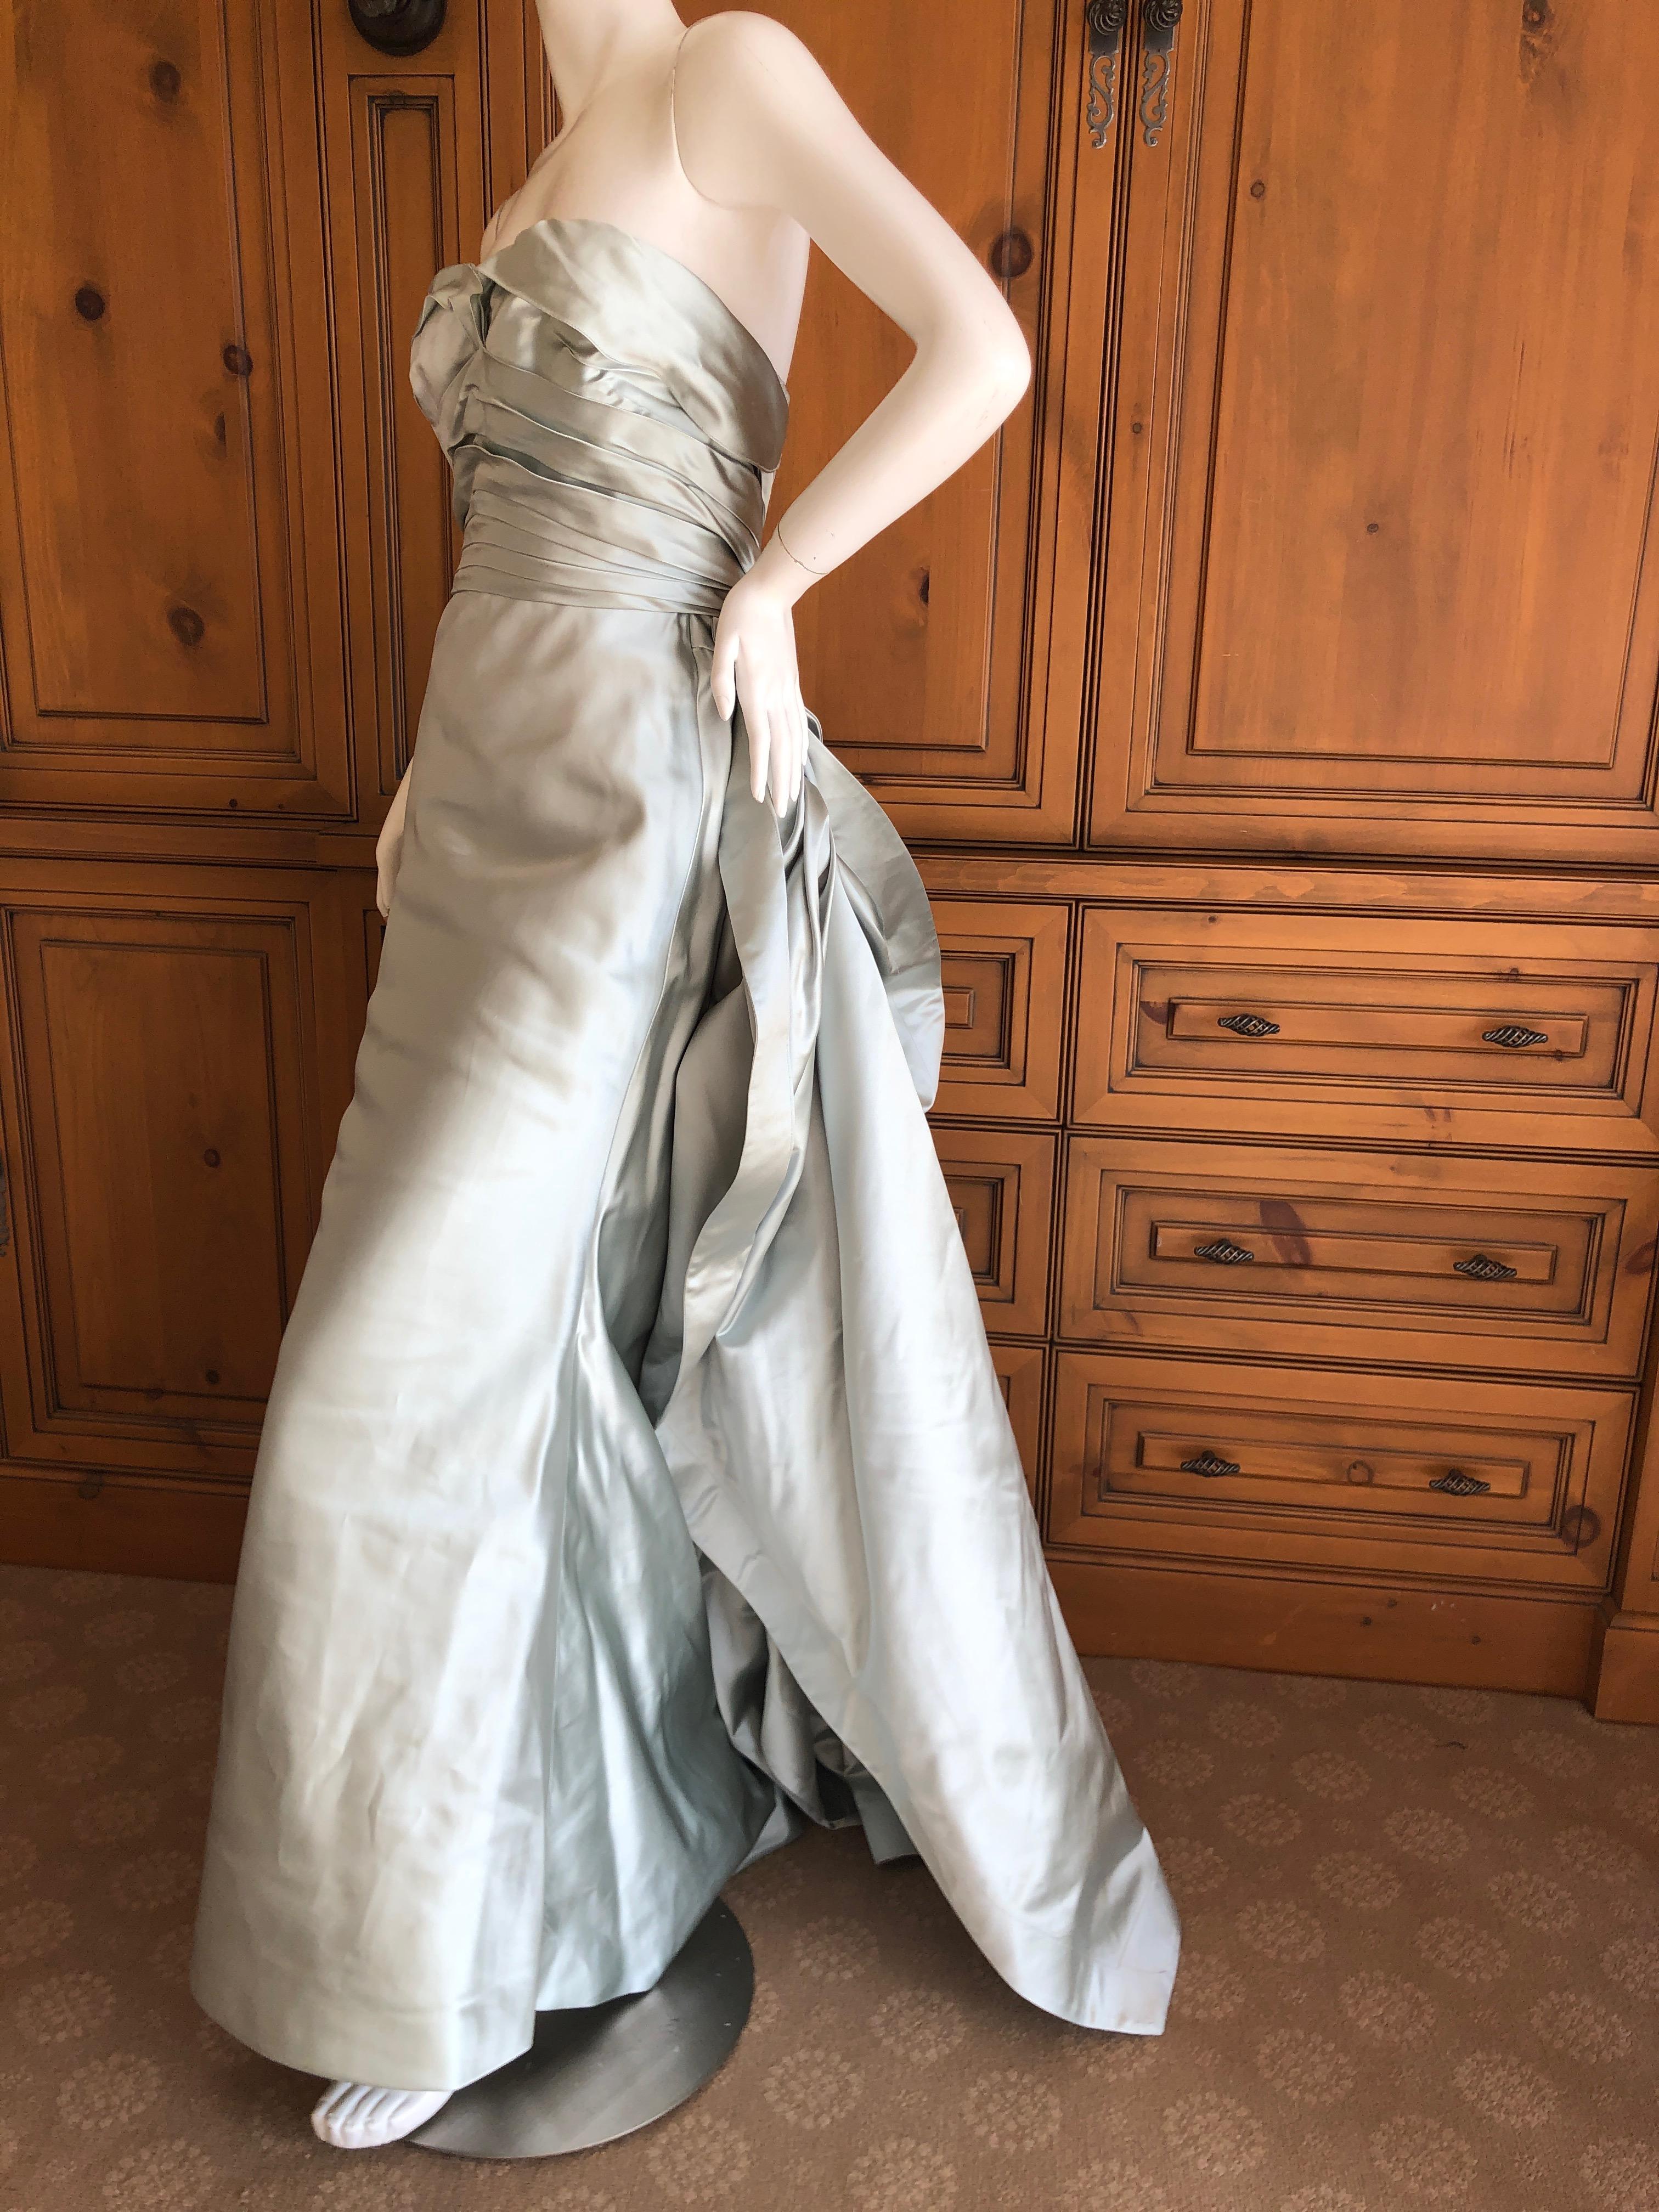 Oscar de la Renta 2014 Met Ball Silver Strapless Ballgown Homage Charles James In Good Condition For Sale In Cloverdale, CA